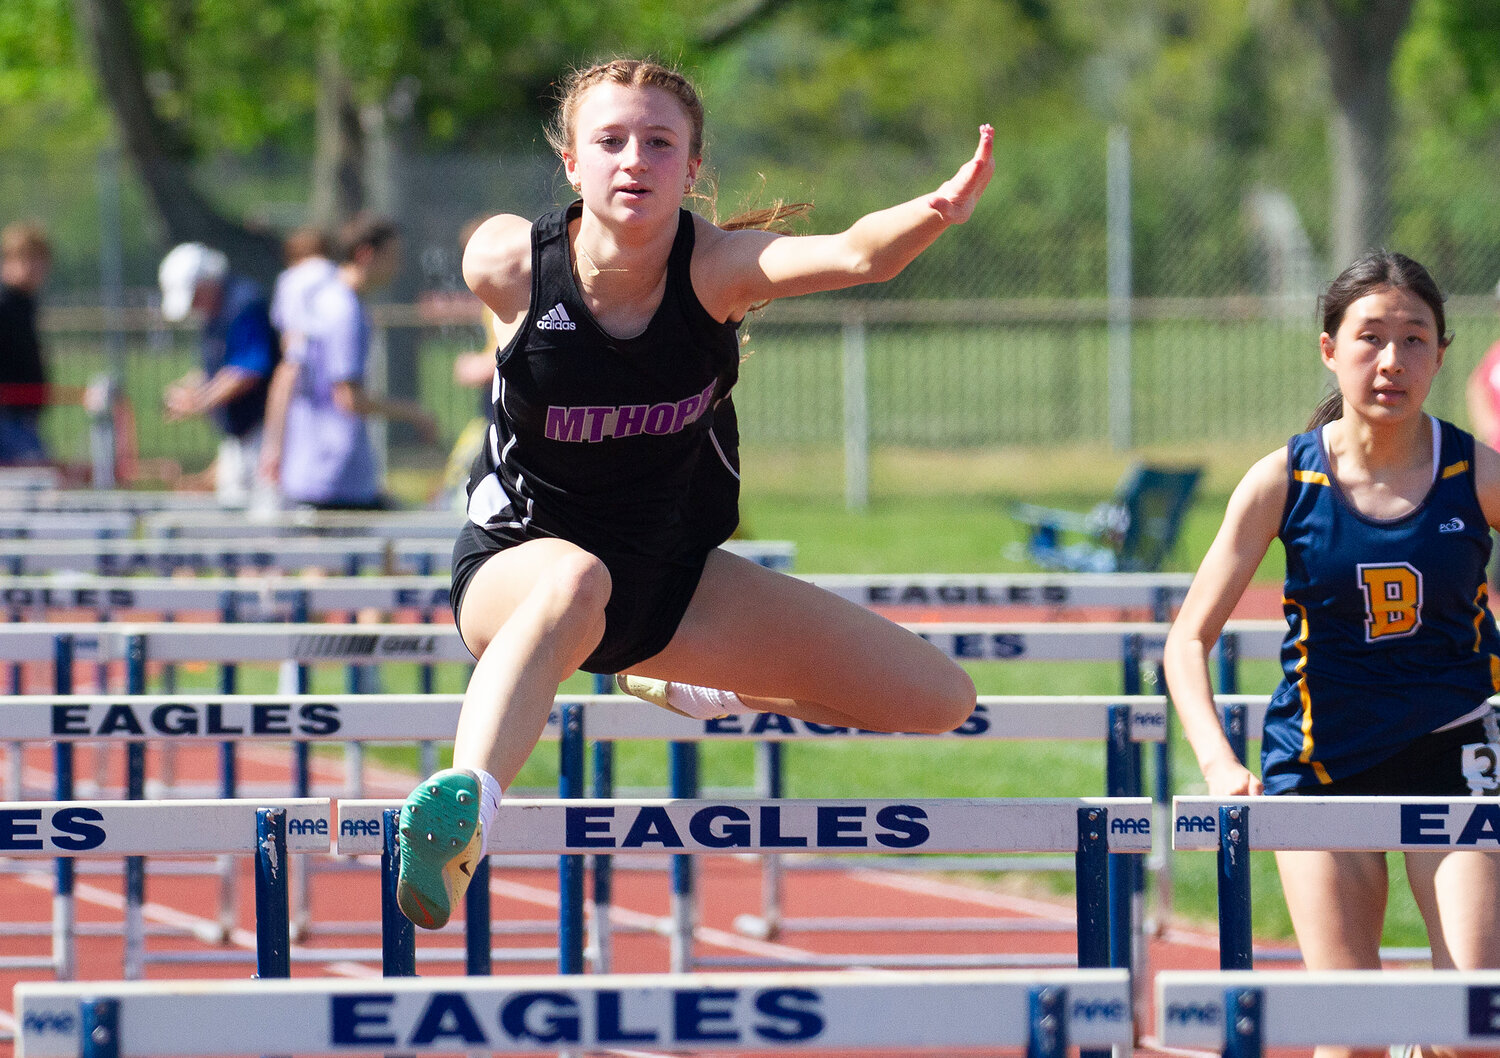 Sophomore Lola Silva places fifth in the 110 meter hurdles. She also placed second in the long jump with a leap of 16 feet 5 inches and placed fourth in the 300 meter hurdles.